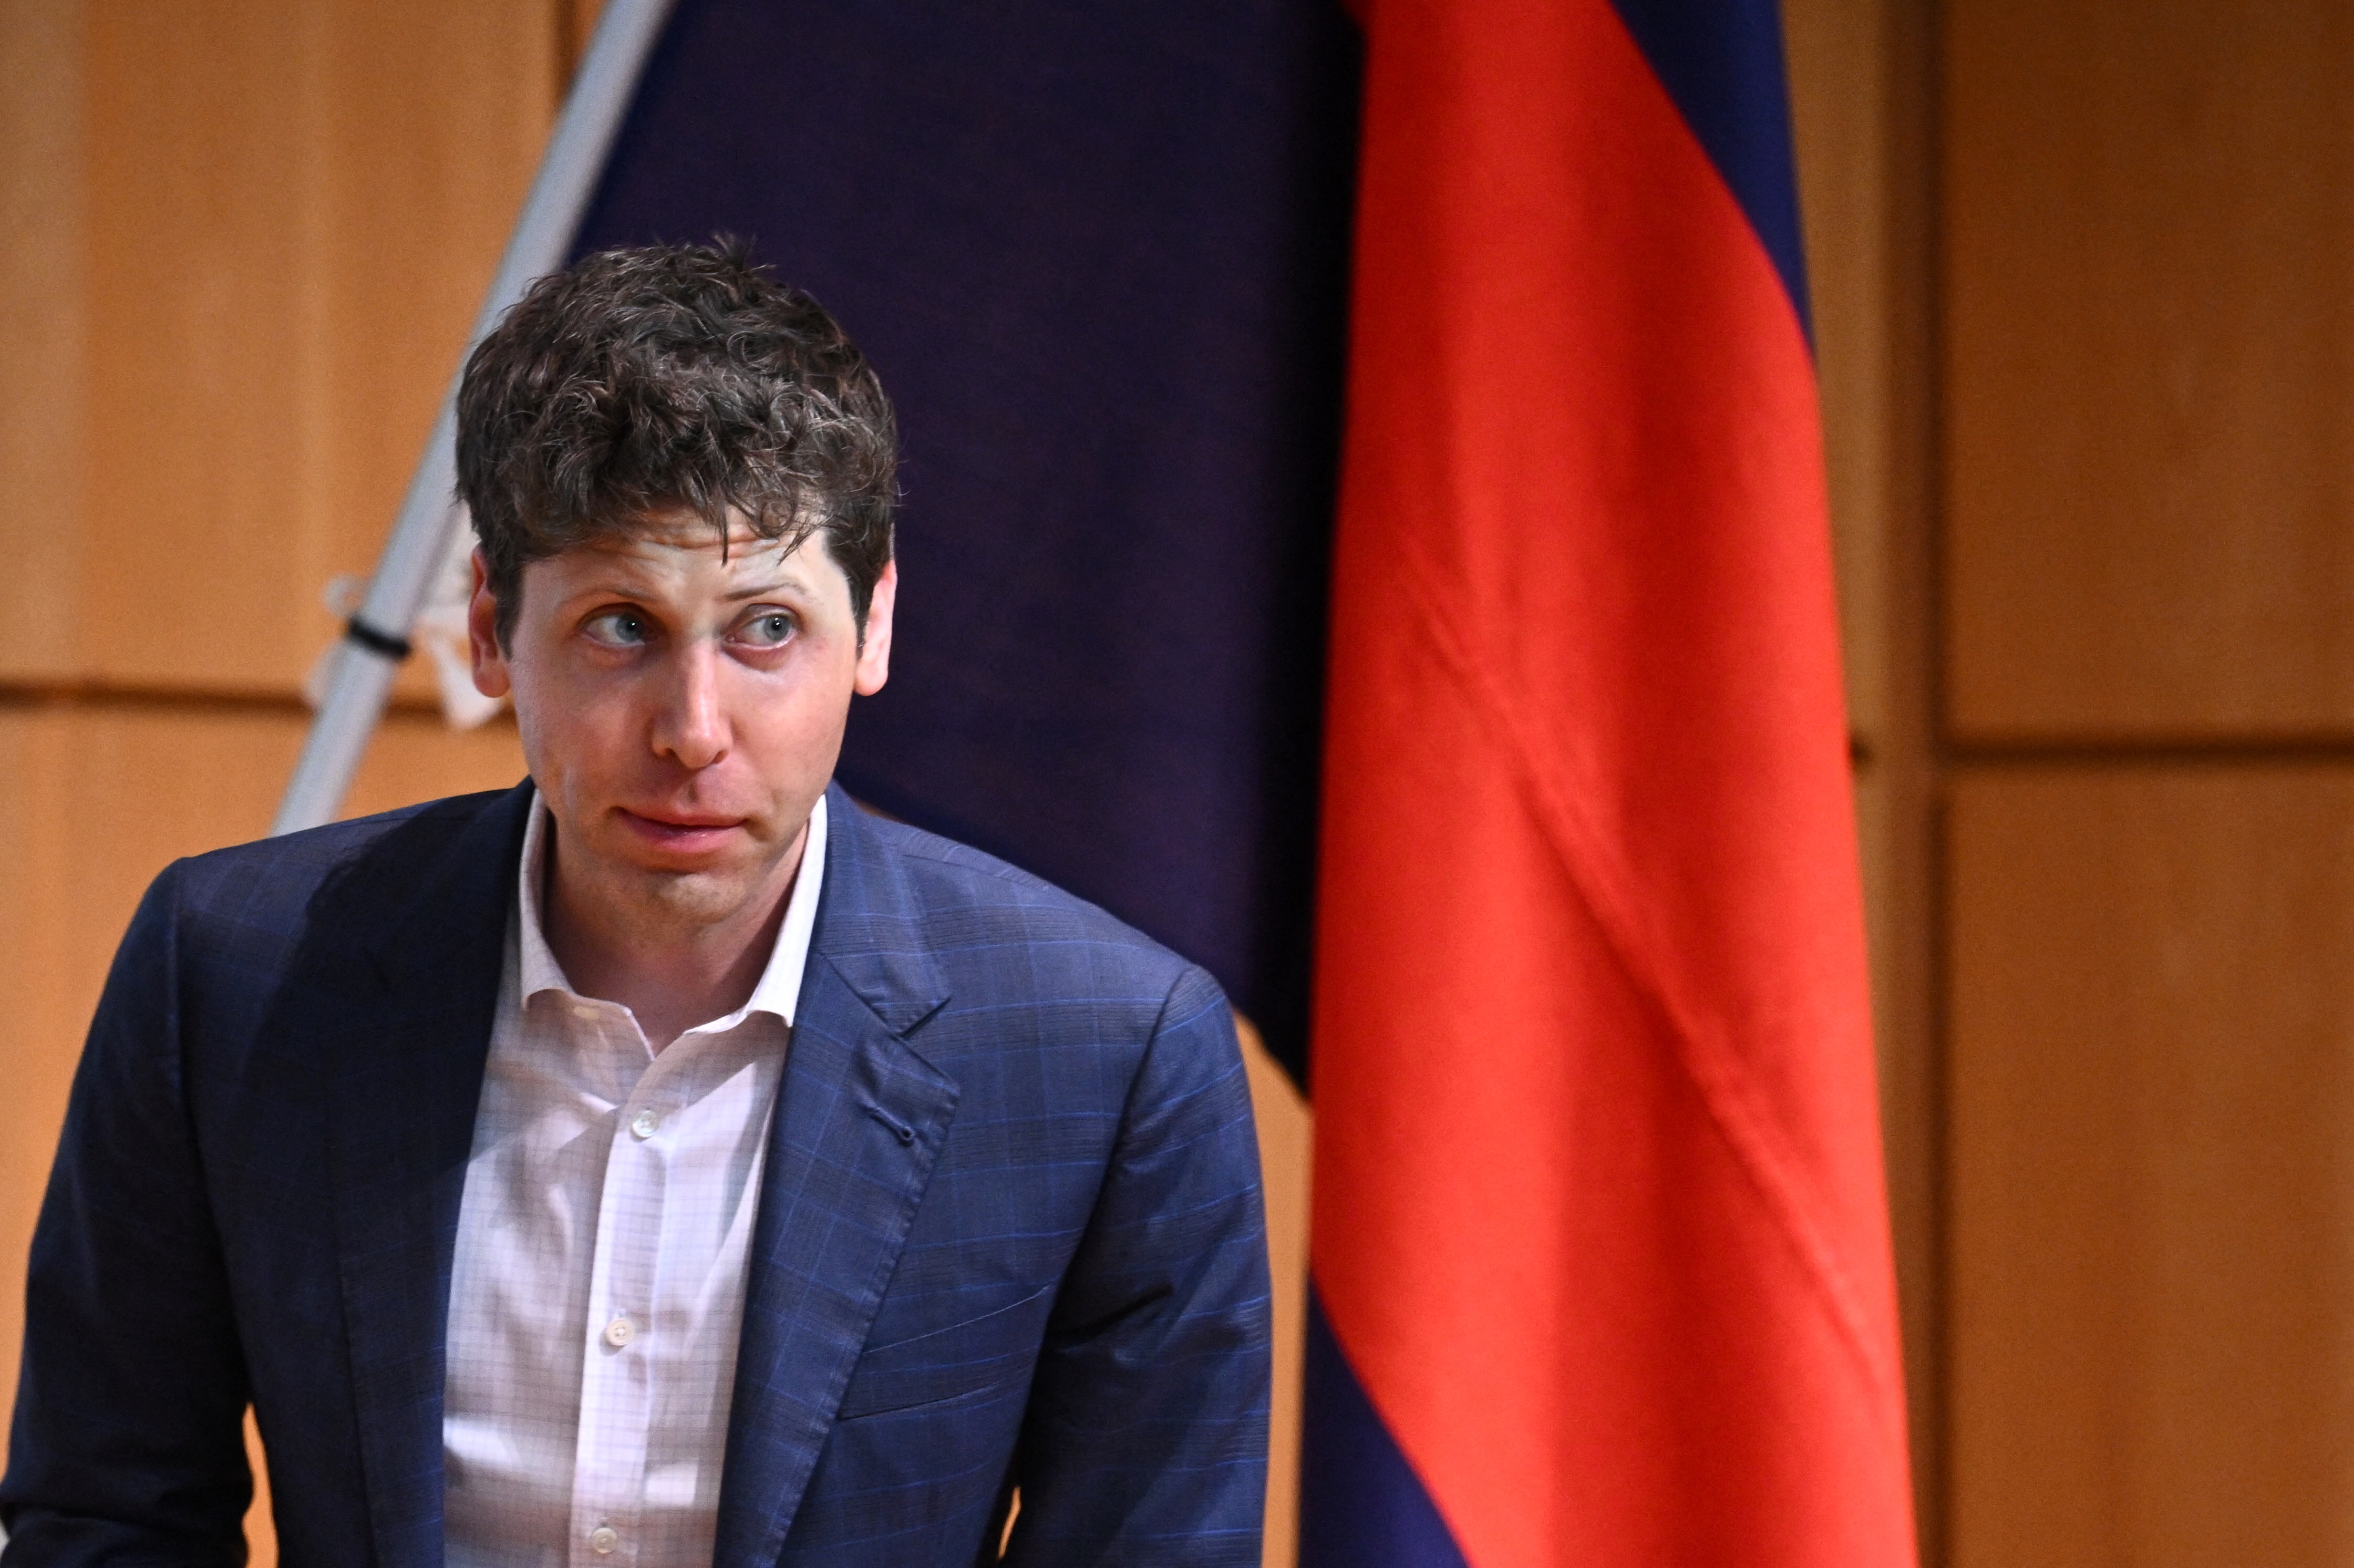 OpenAI CEO Sam Altman arrives to address Keio University in Tokyo on June 12, 2023. (Photo by Philip FONG / AFP) (Photo by PHILIP FONG/AFP via Getty Images)